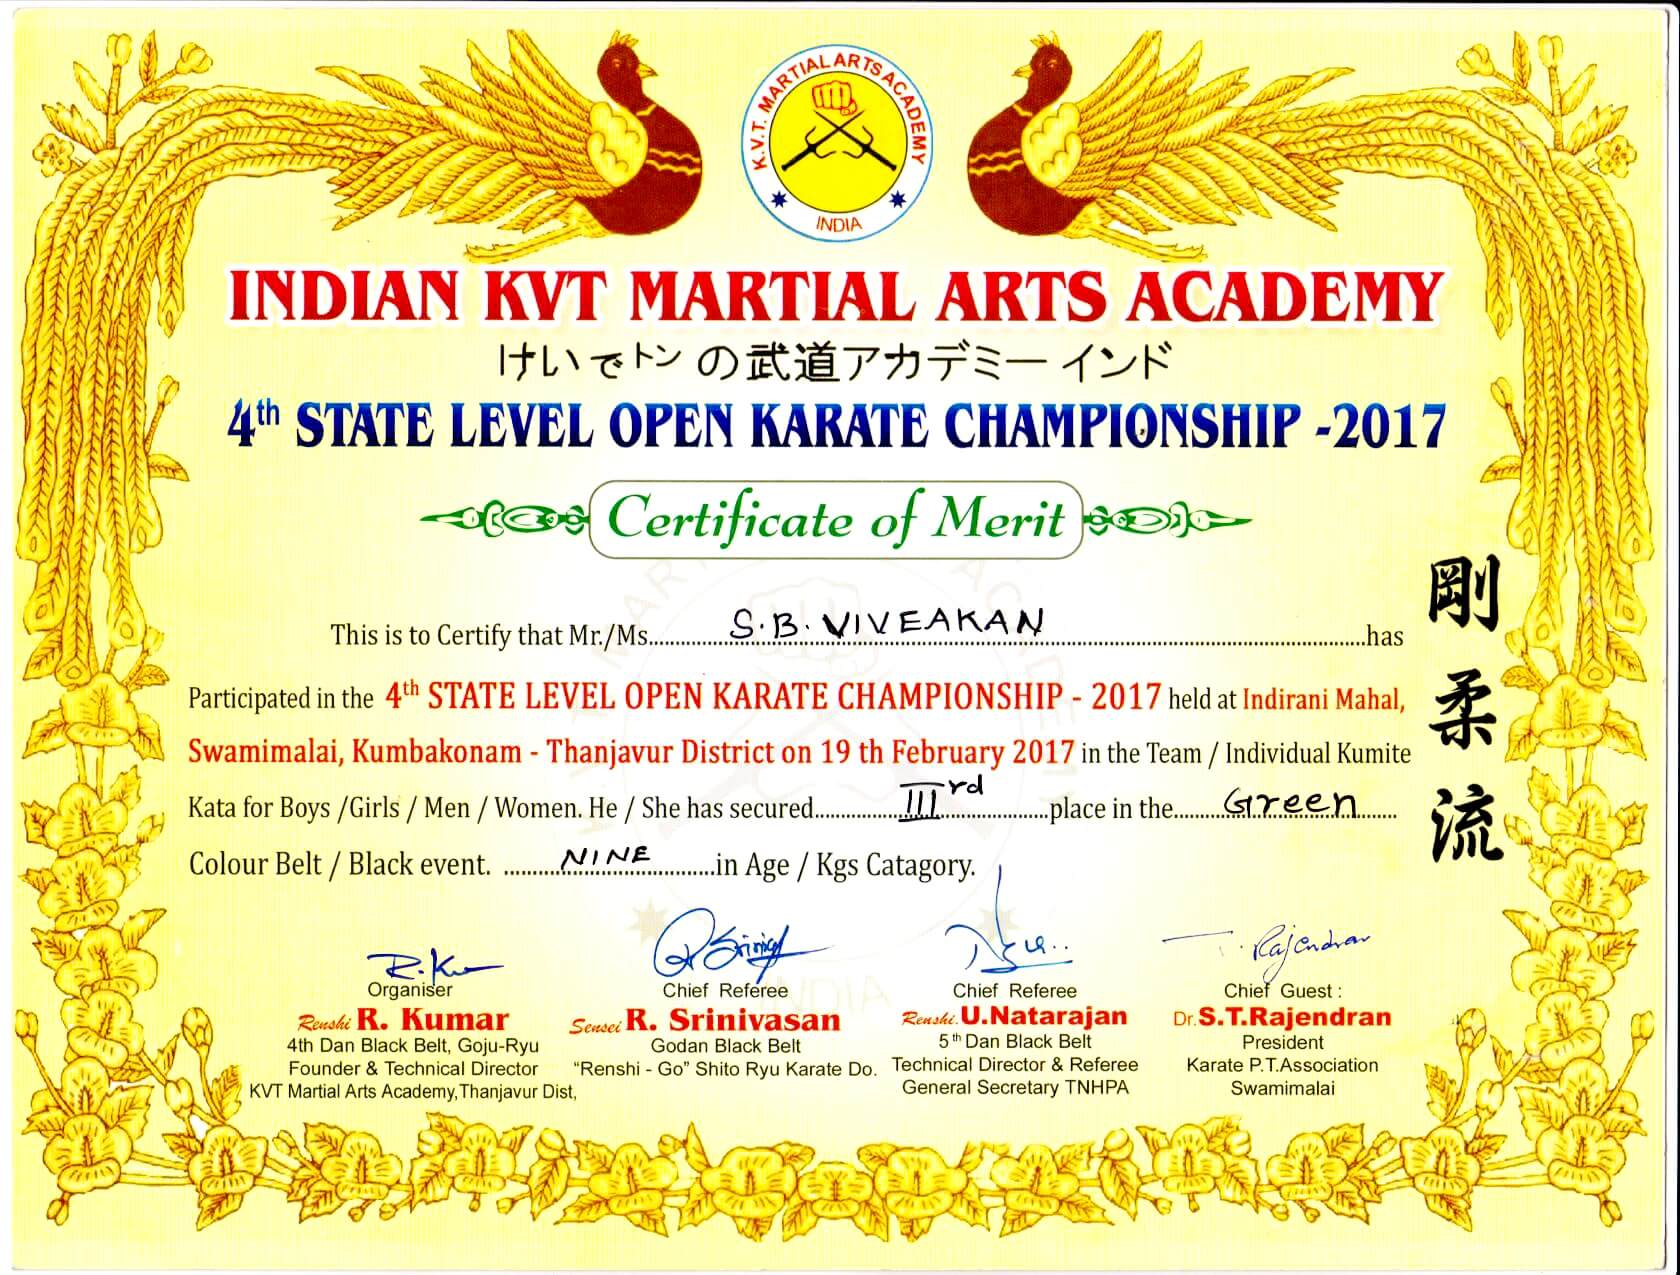 "4th STATE LEVEL OPEN KARATE CHAMPIONSHIP - 2017"